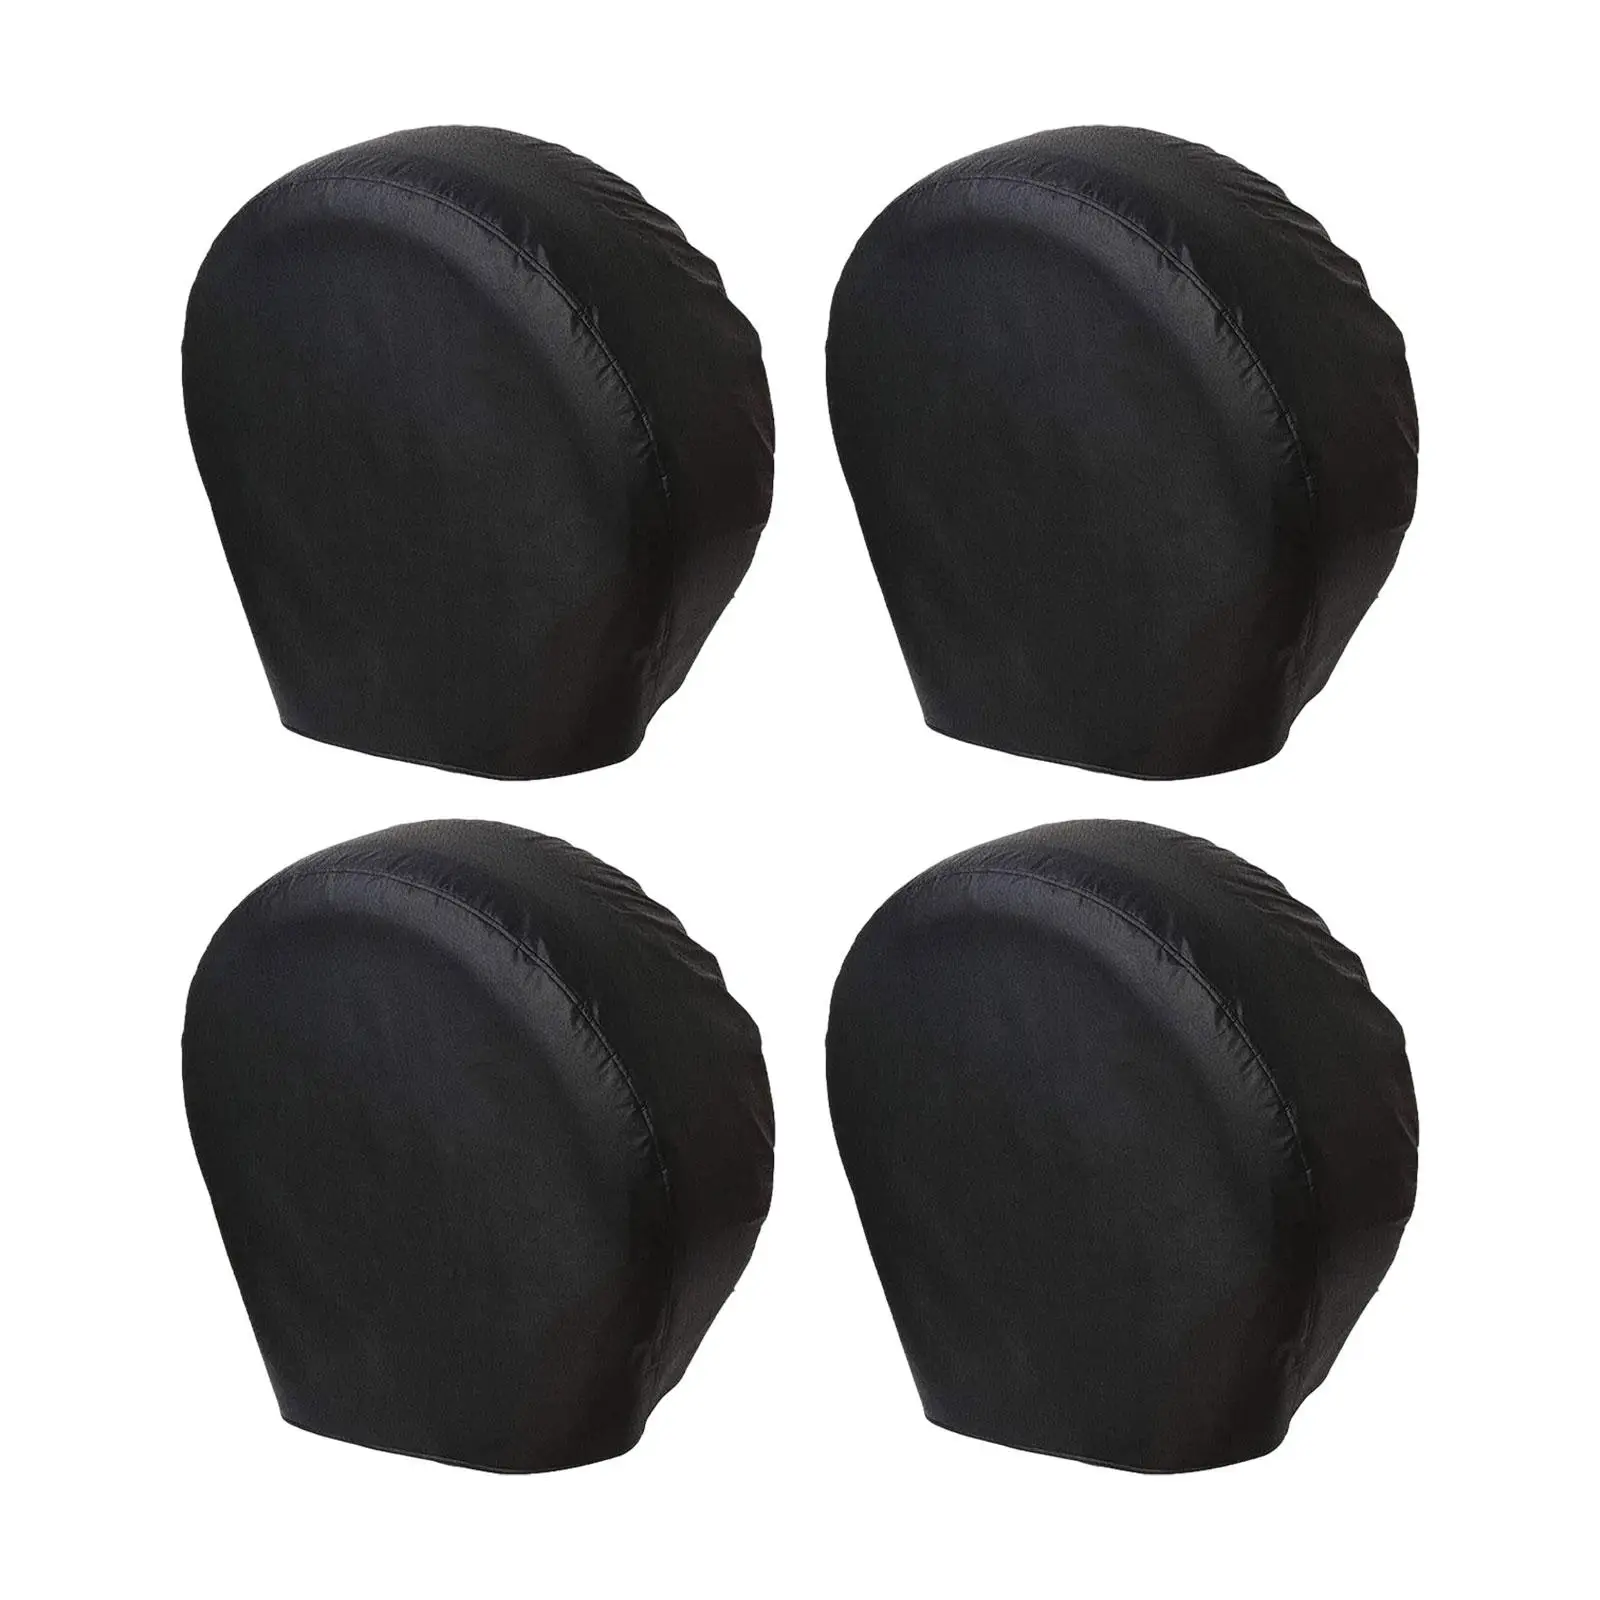 4Pcs Wheel Cover Protective Cover Tire Wheel Protector for Camper Car SUV